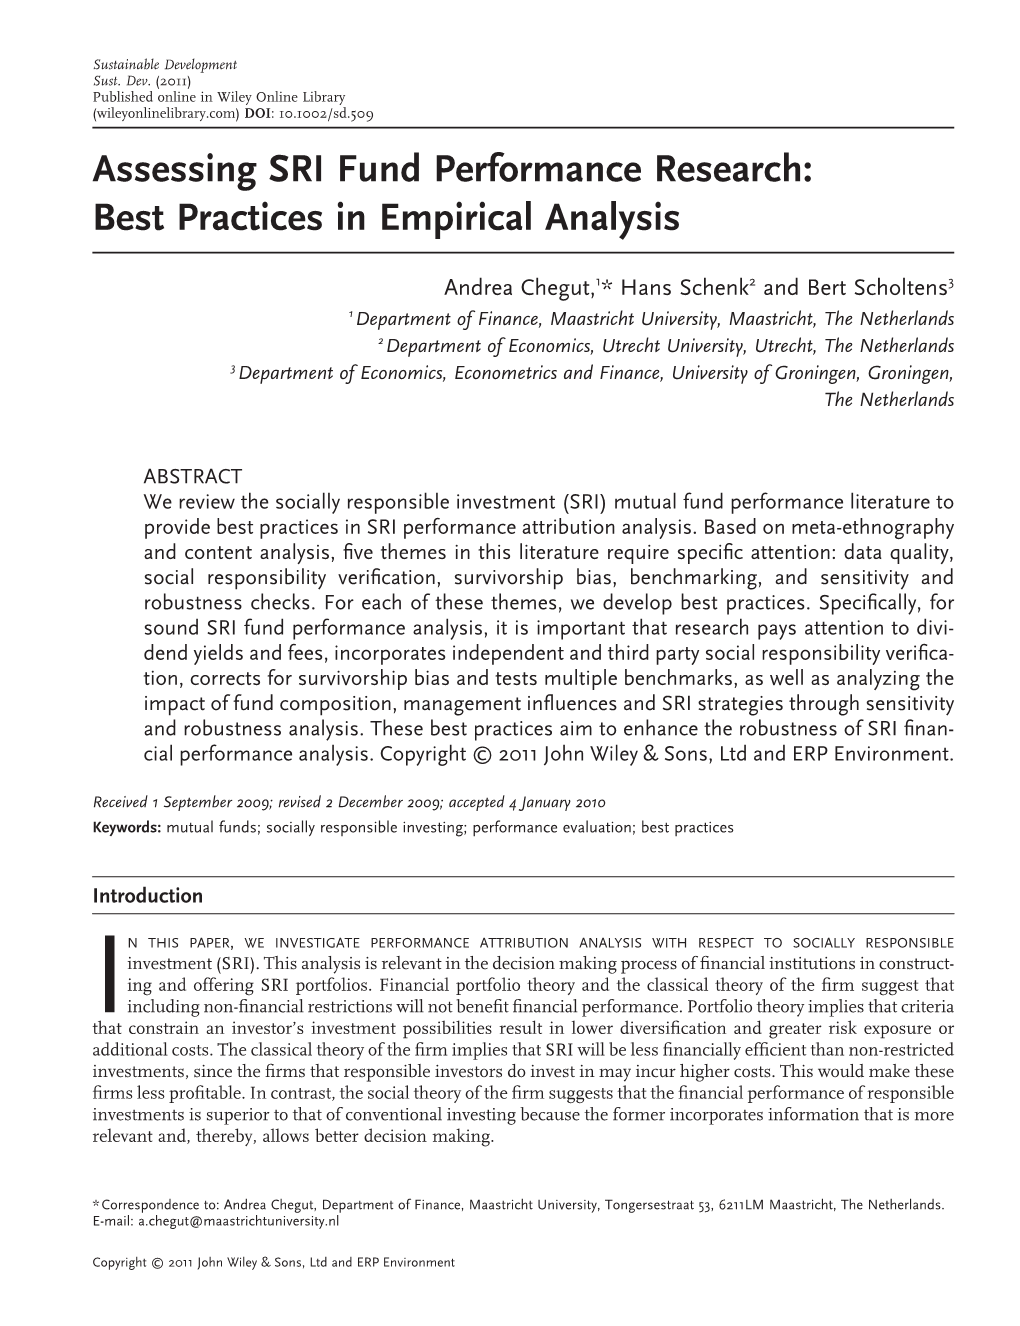 Assessing SRI Fund Performance Research: Best Practices in Empirical Analysis